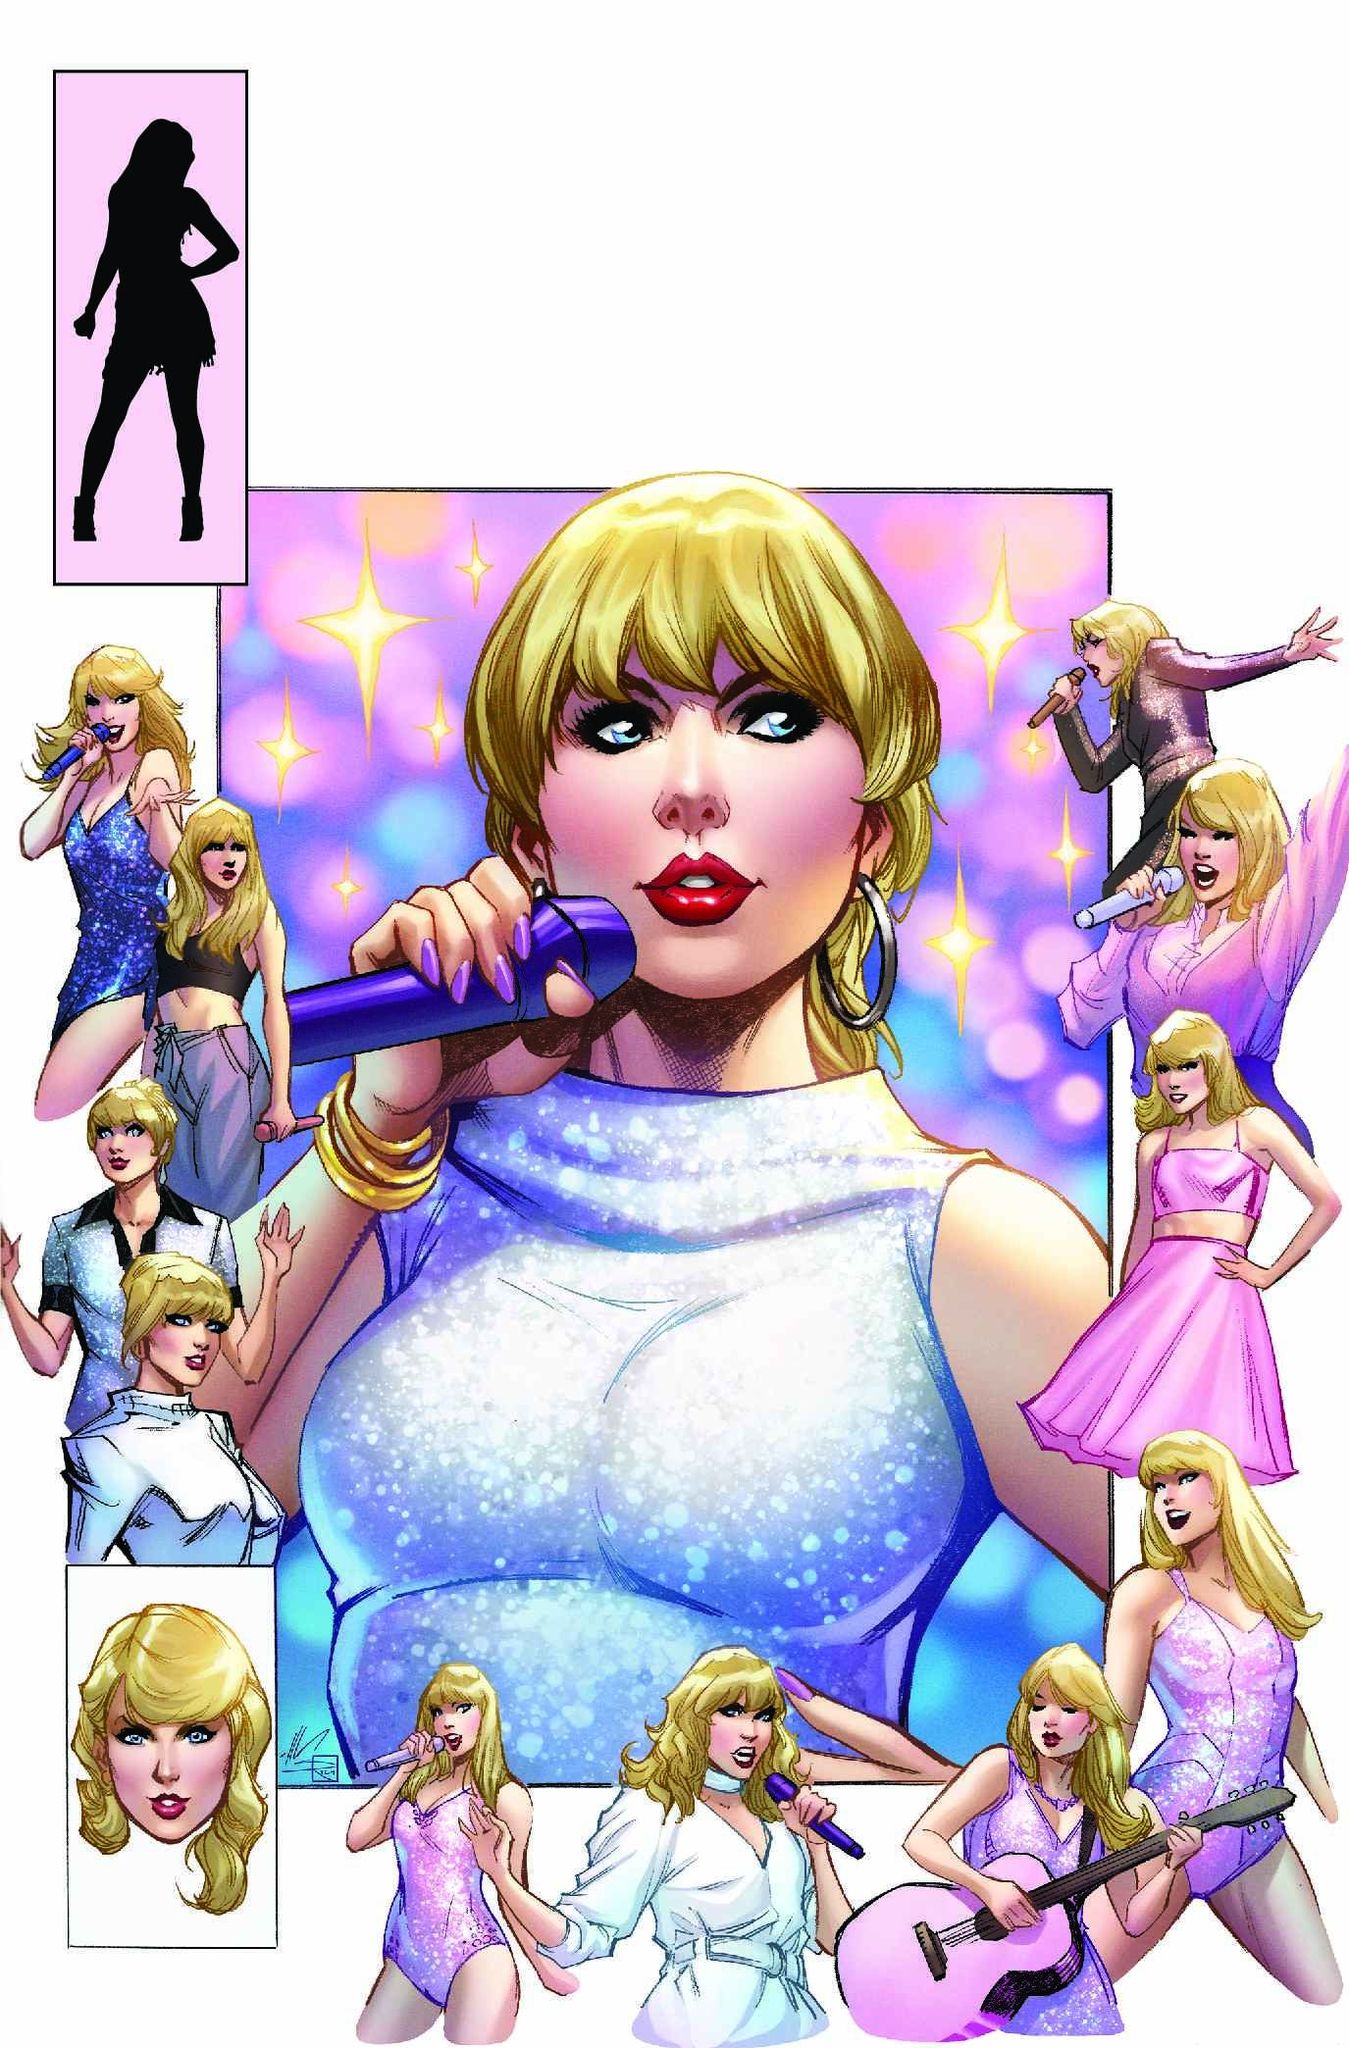 FEMALE FORCE: TAYLOR SWIFT #2 ALE GARZA VARIANT OPTIONS